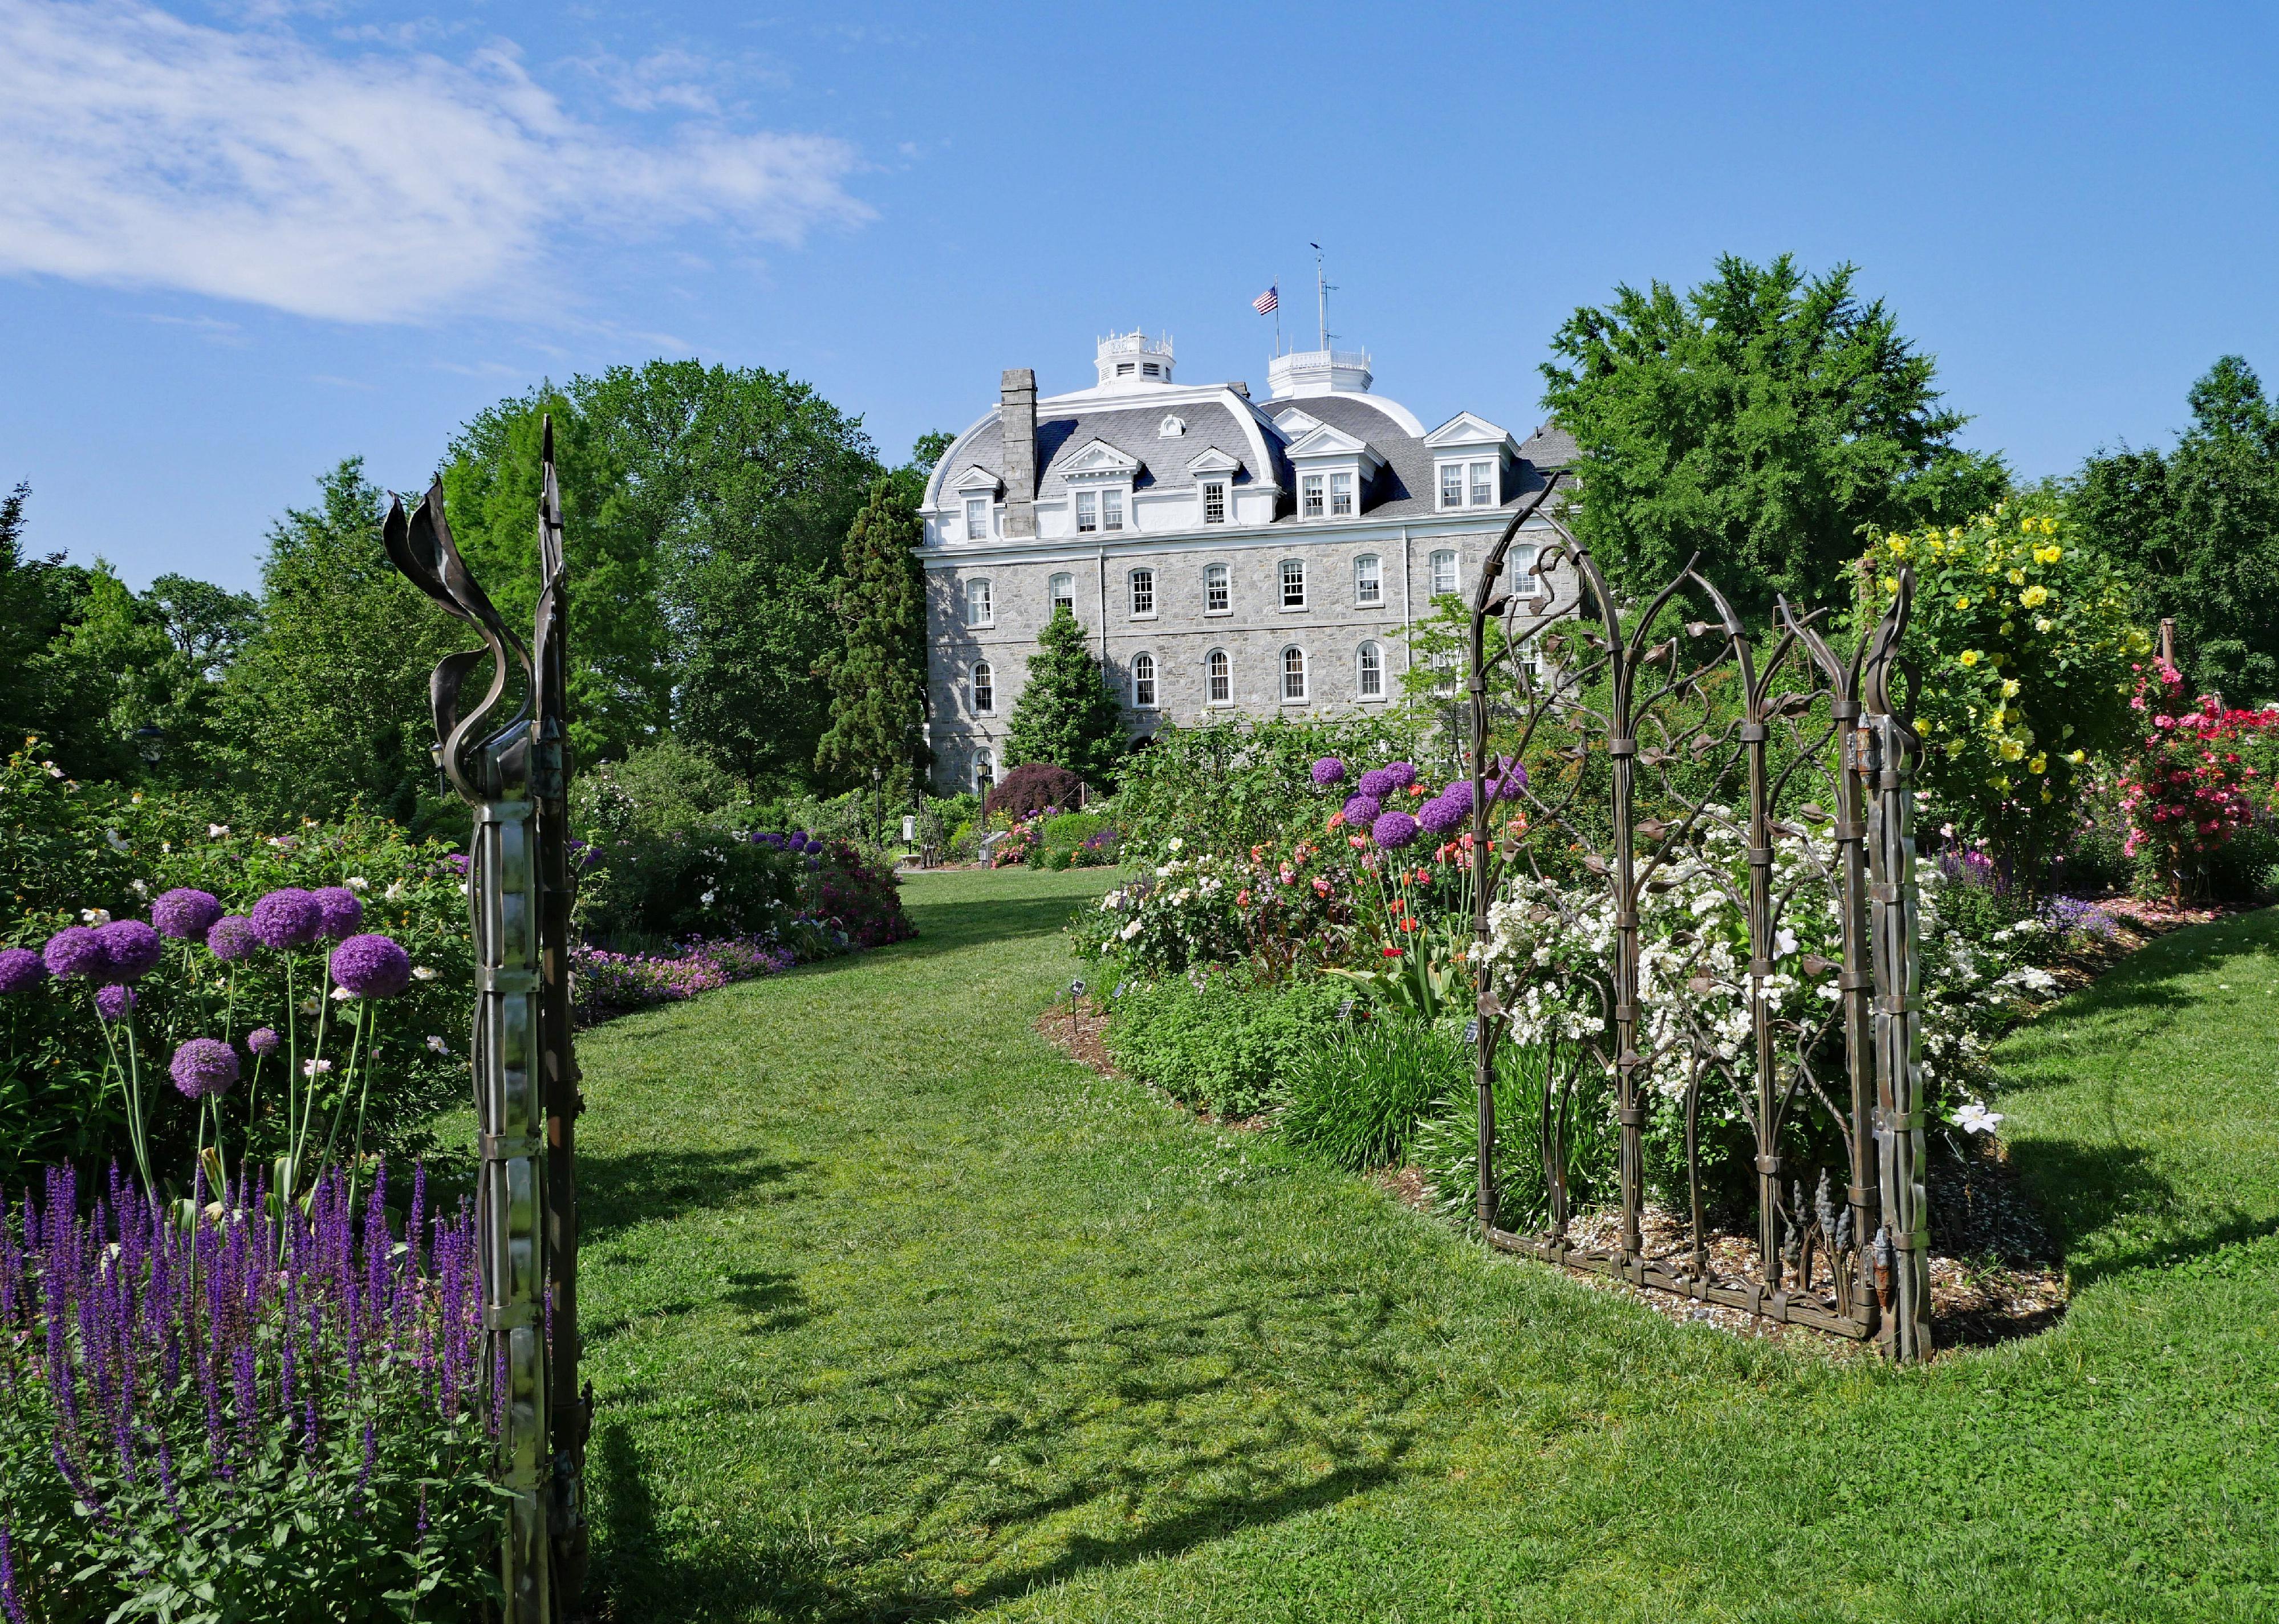 A large historic gray stone home surrounded by blooming gardens.